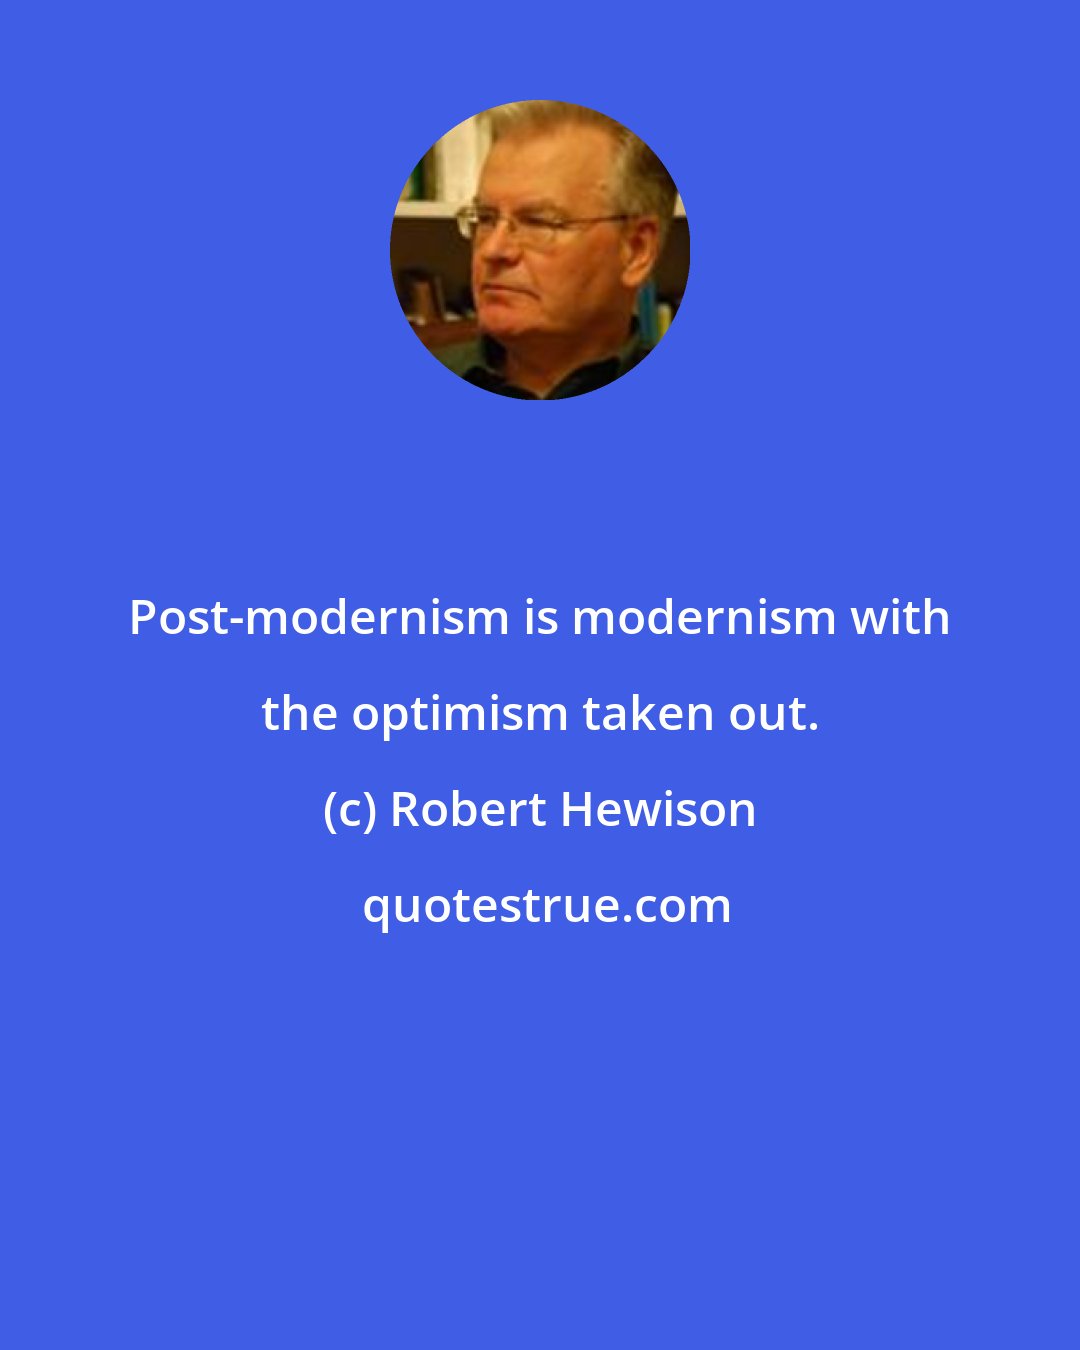 Robert Hewison: Post-modernism is modernism with the optimism taken out.